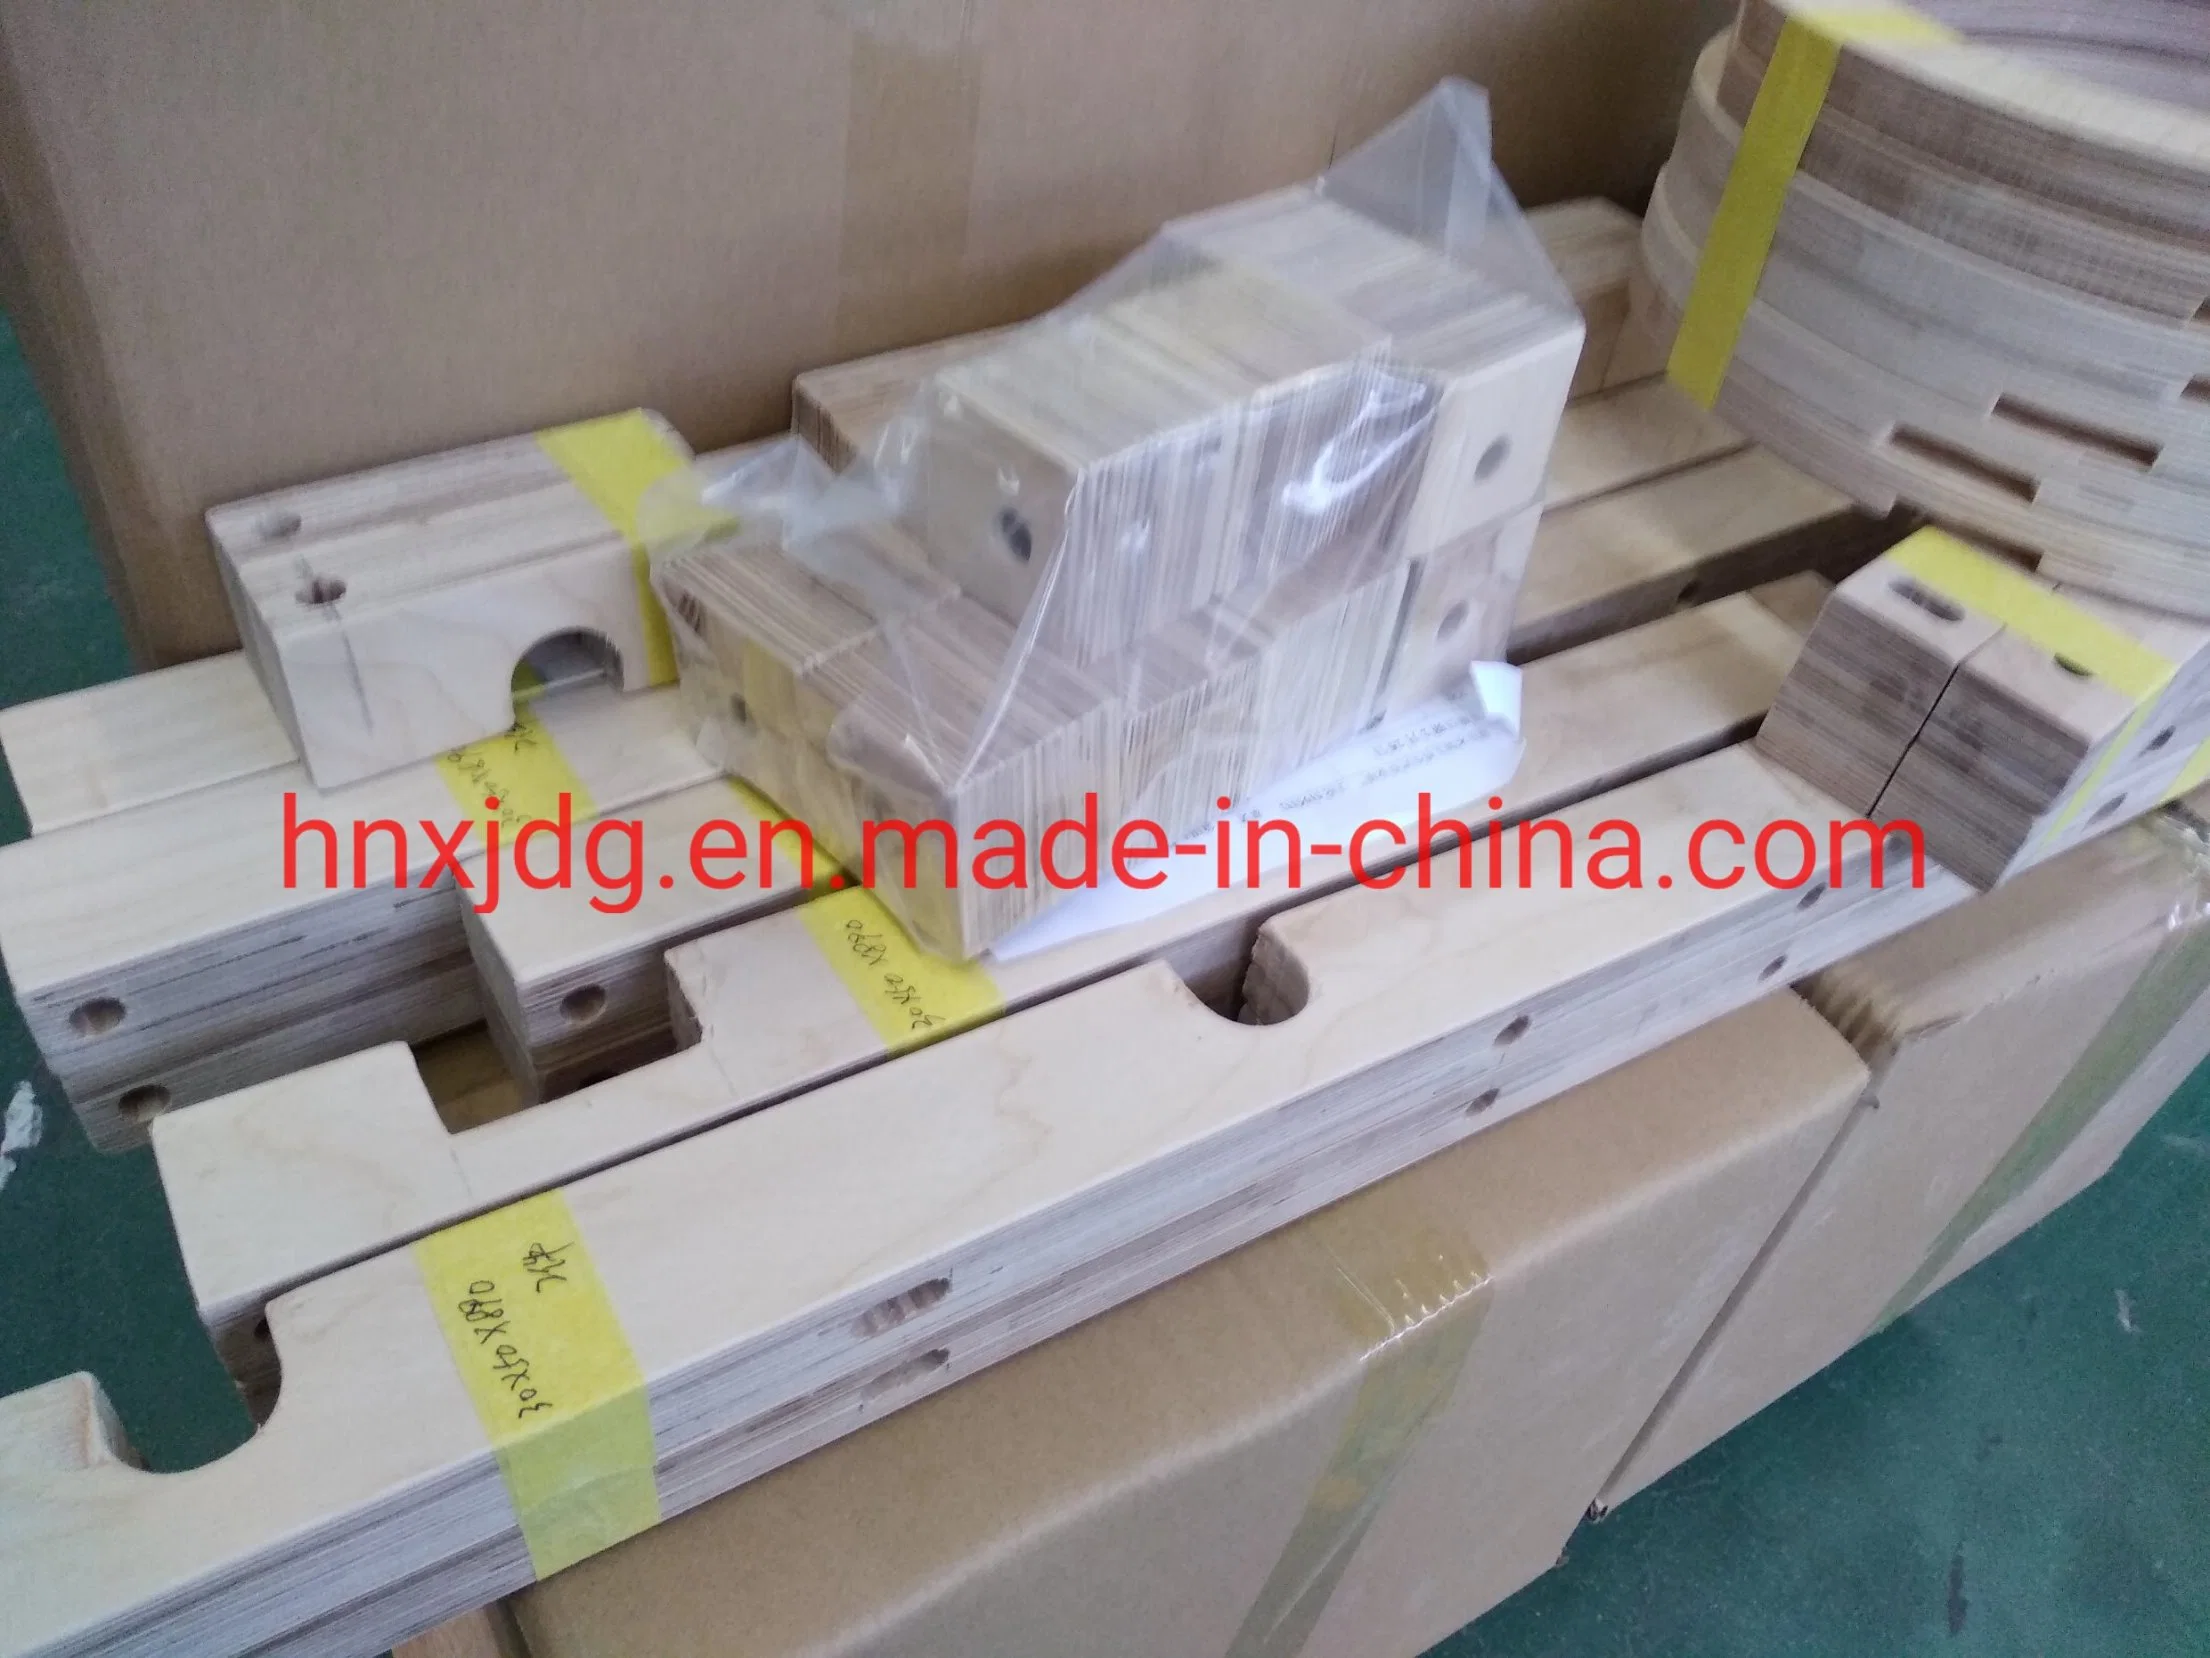 Electrical Insulation Materials China High quality/High cost performance Laminated Plywood Sheet for Oil-Immersed Transformer